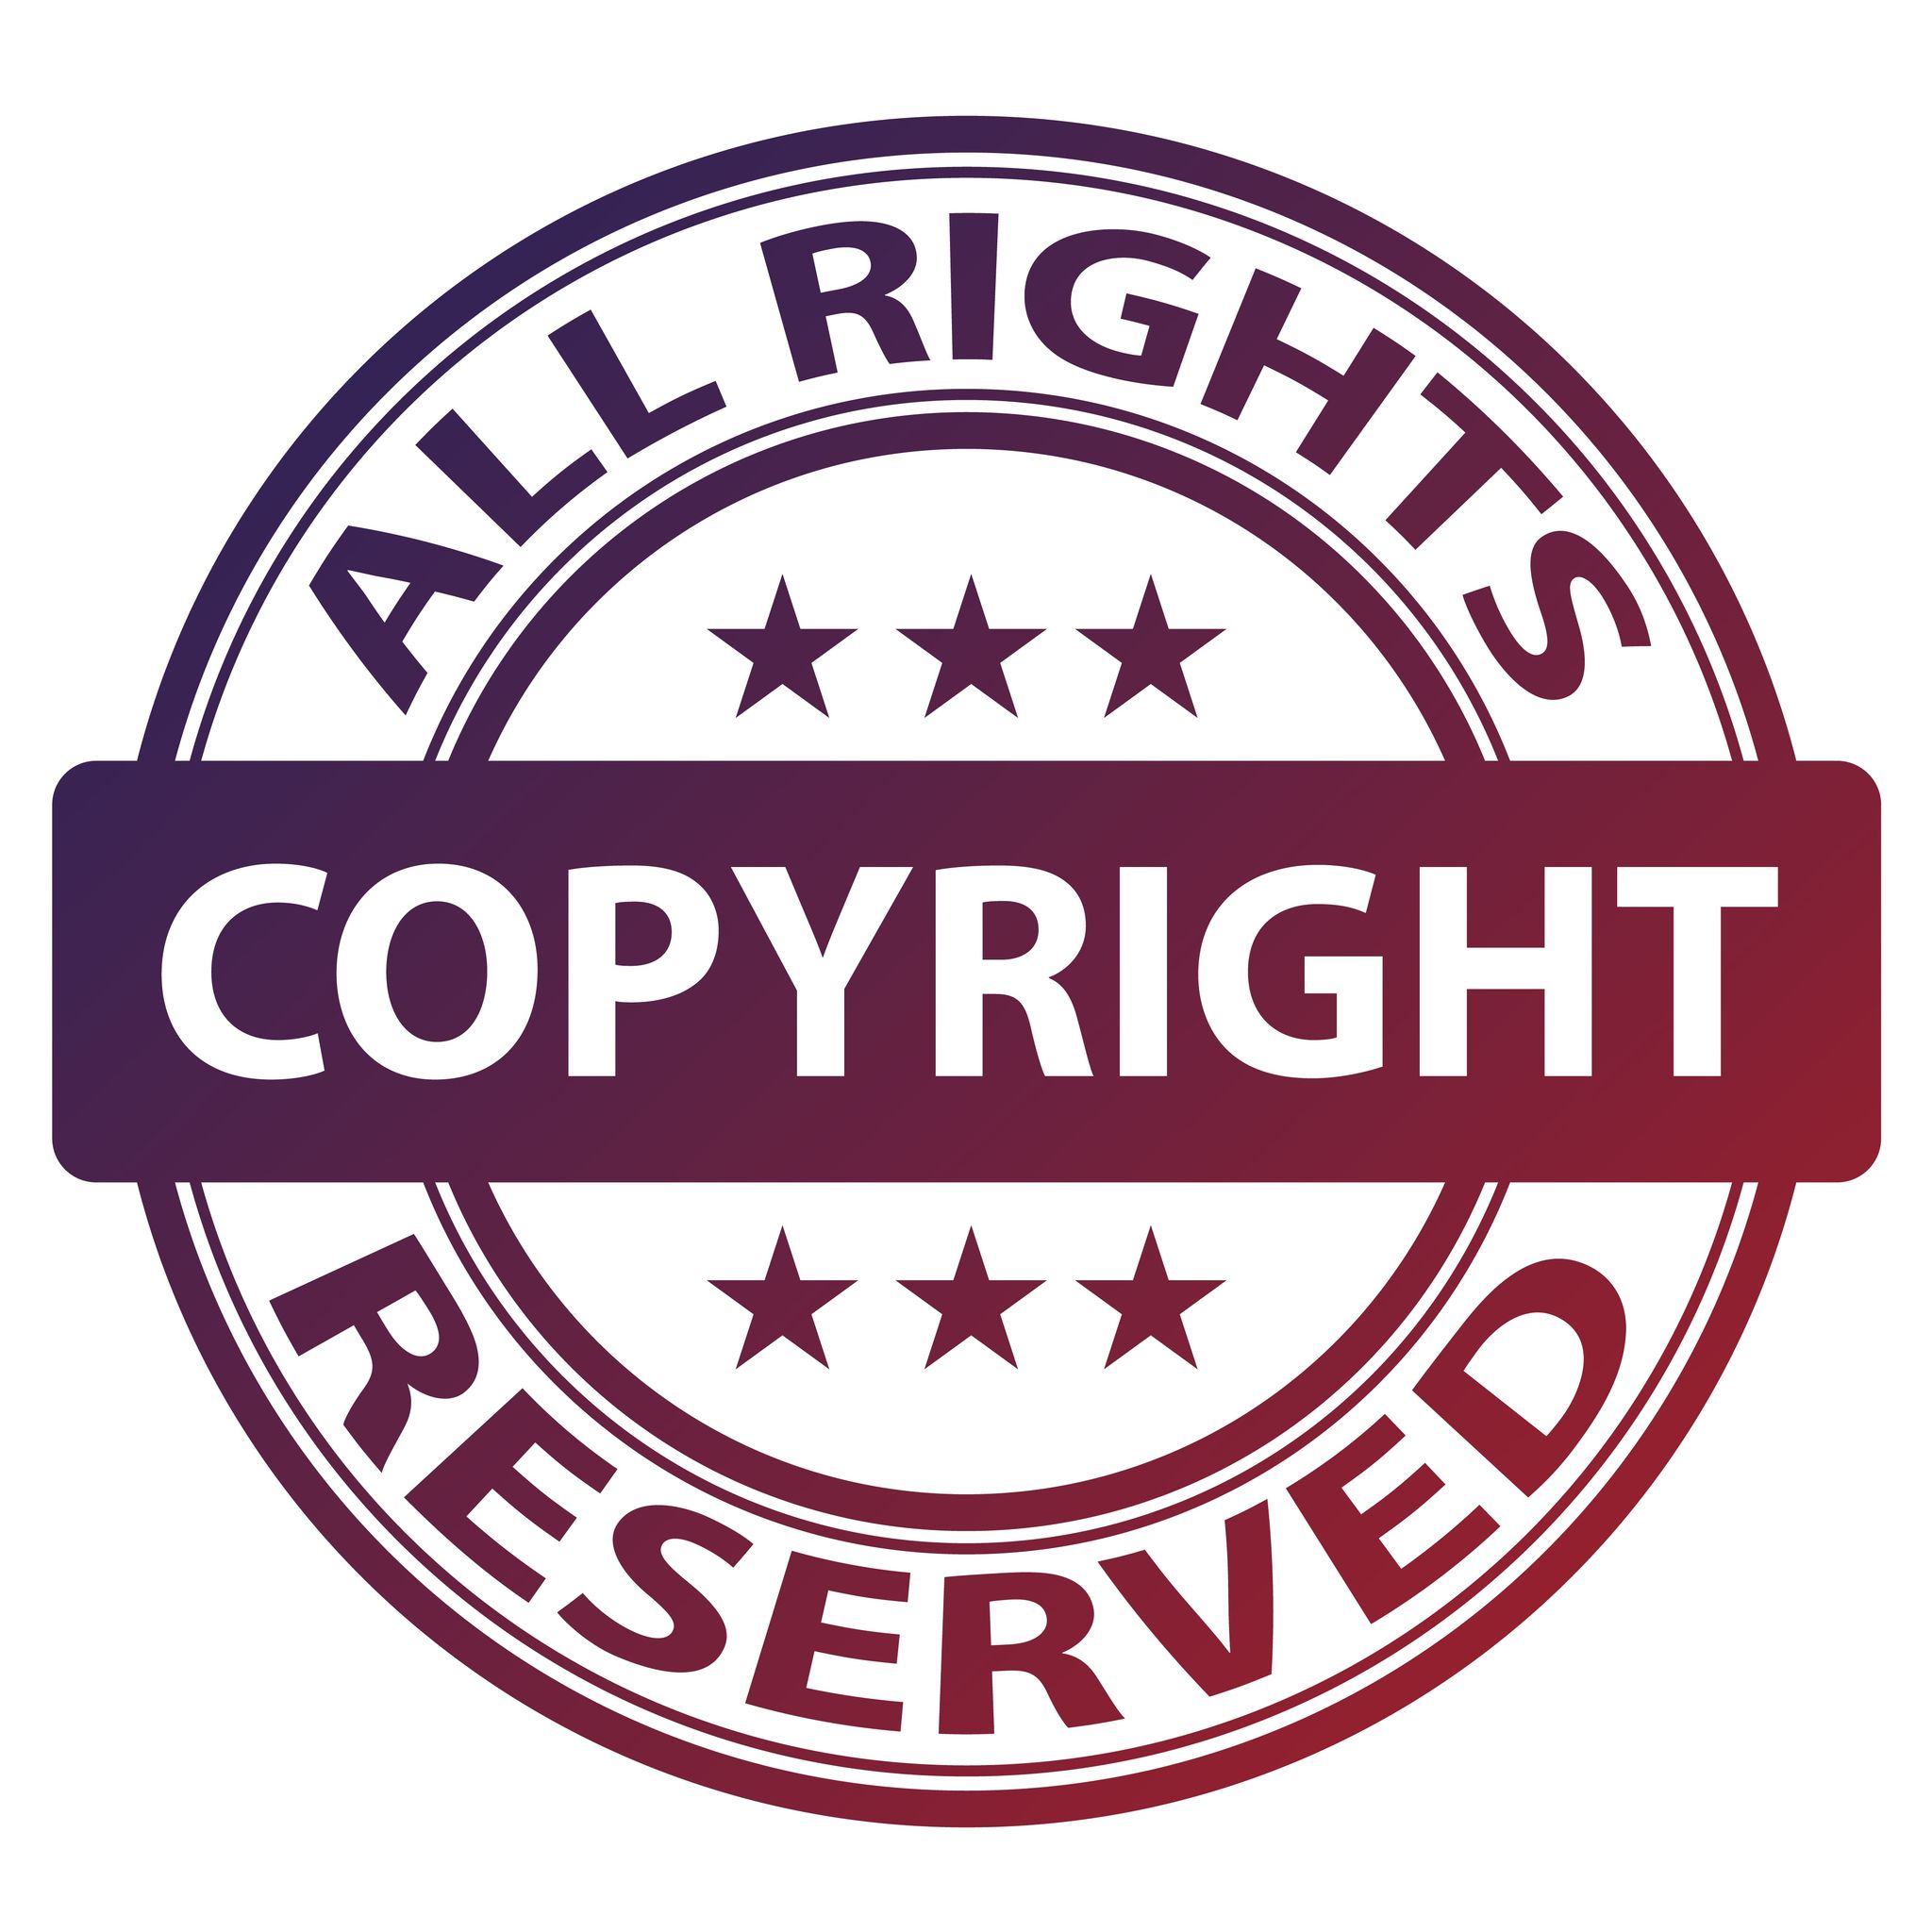 Efforts Towards Copyright Policy in China